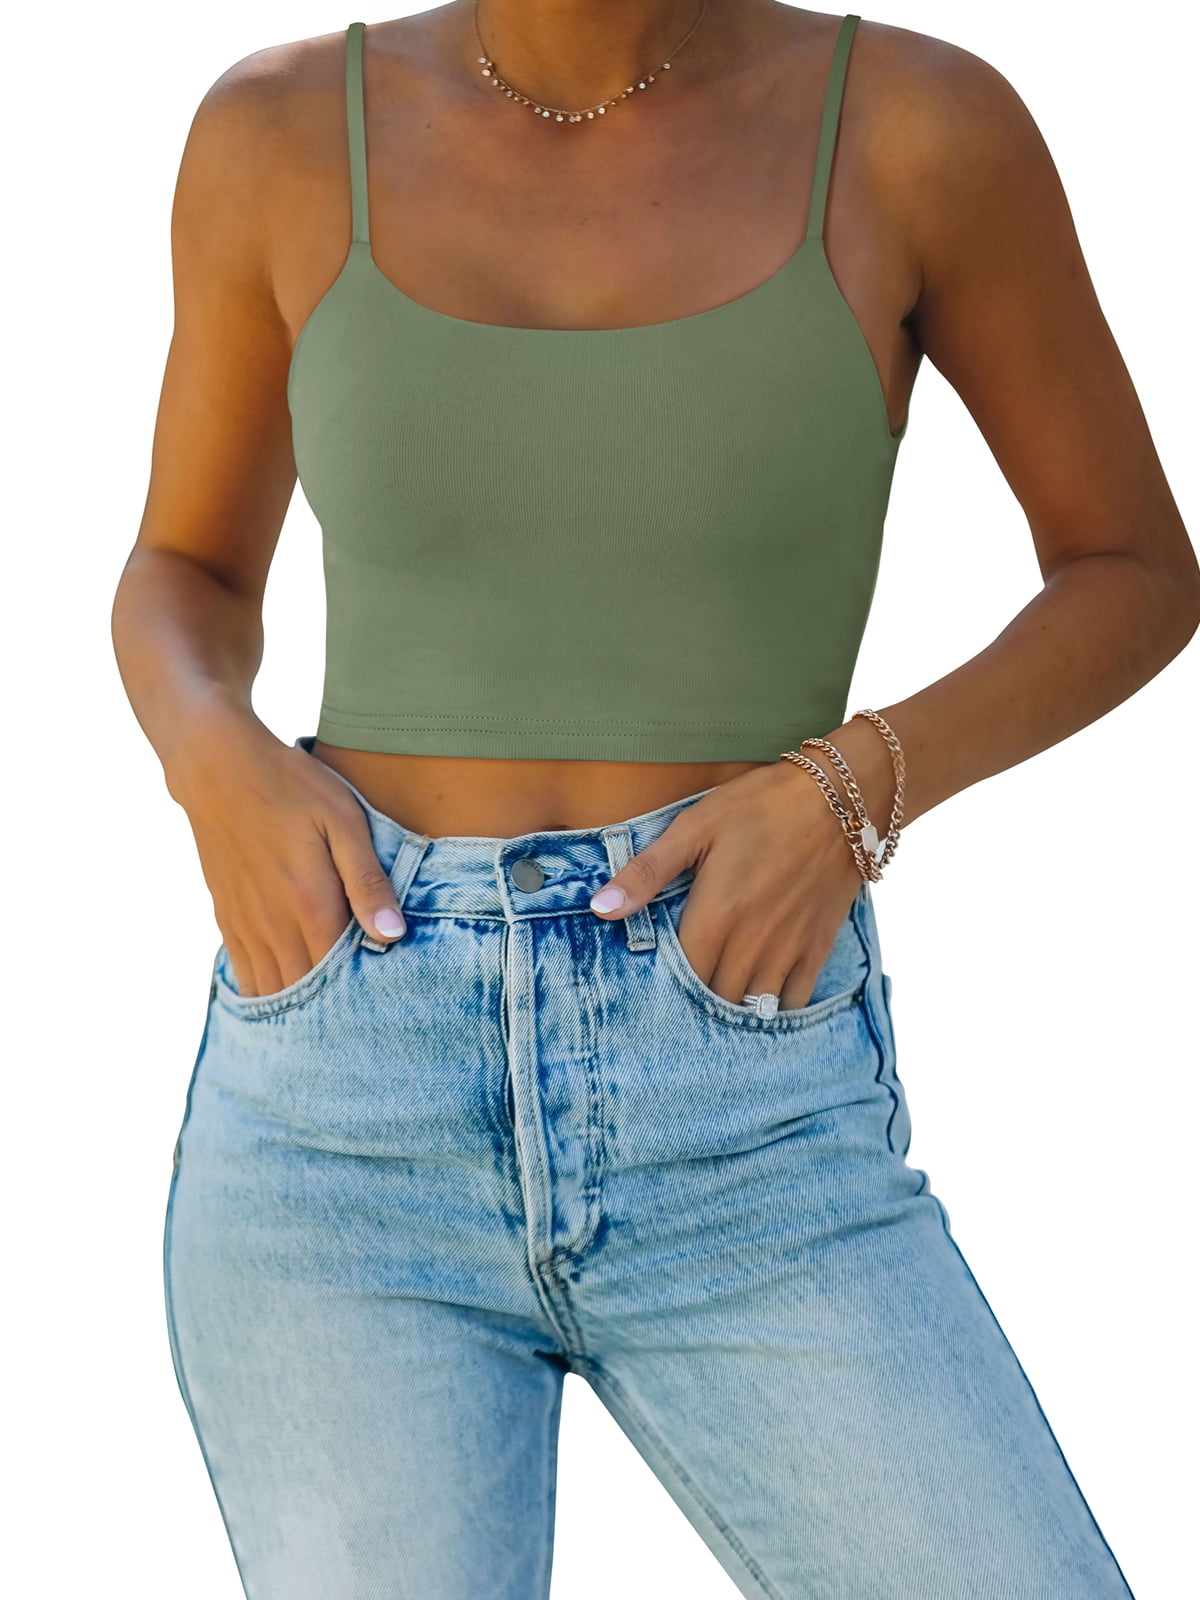 Women's Tank Tops: Cropped, Layering & More